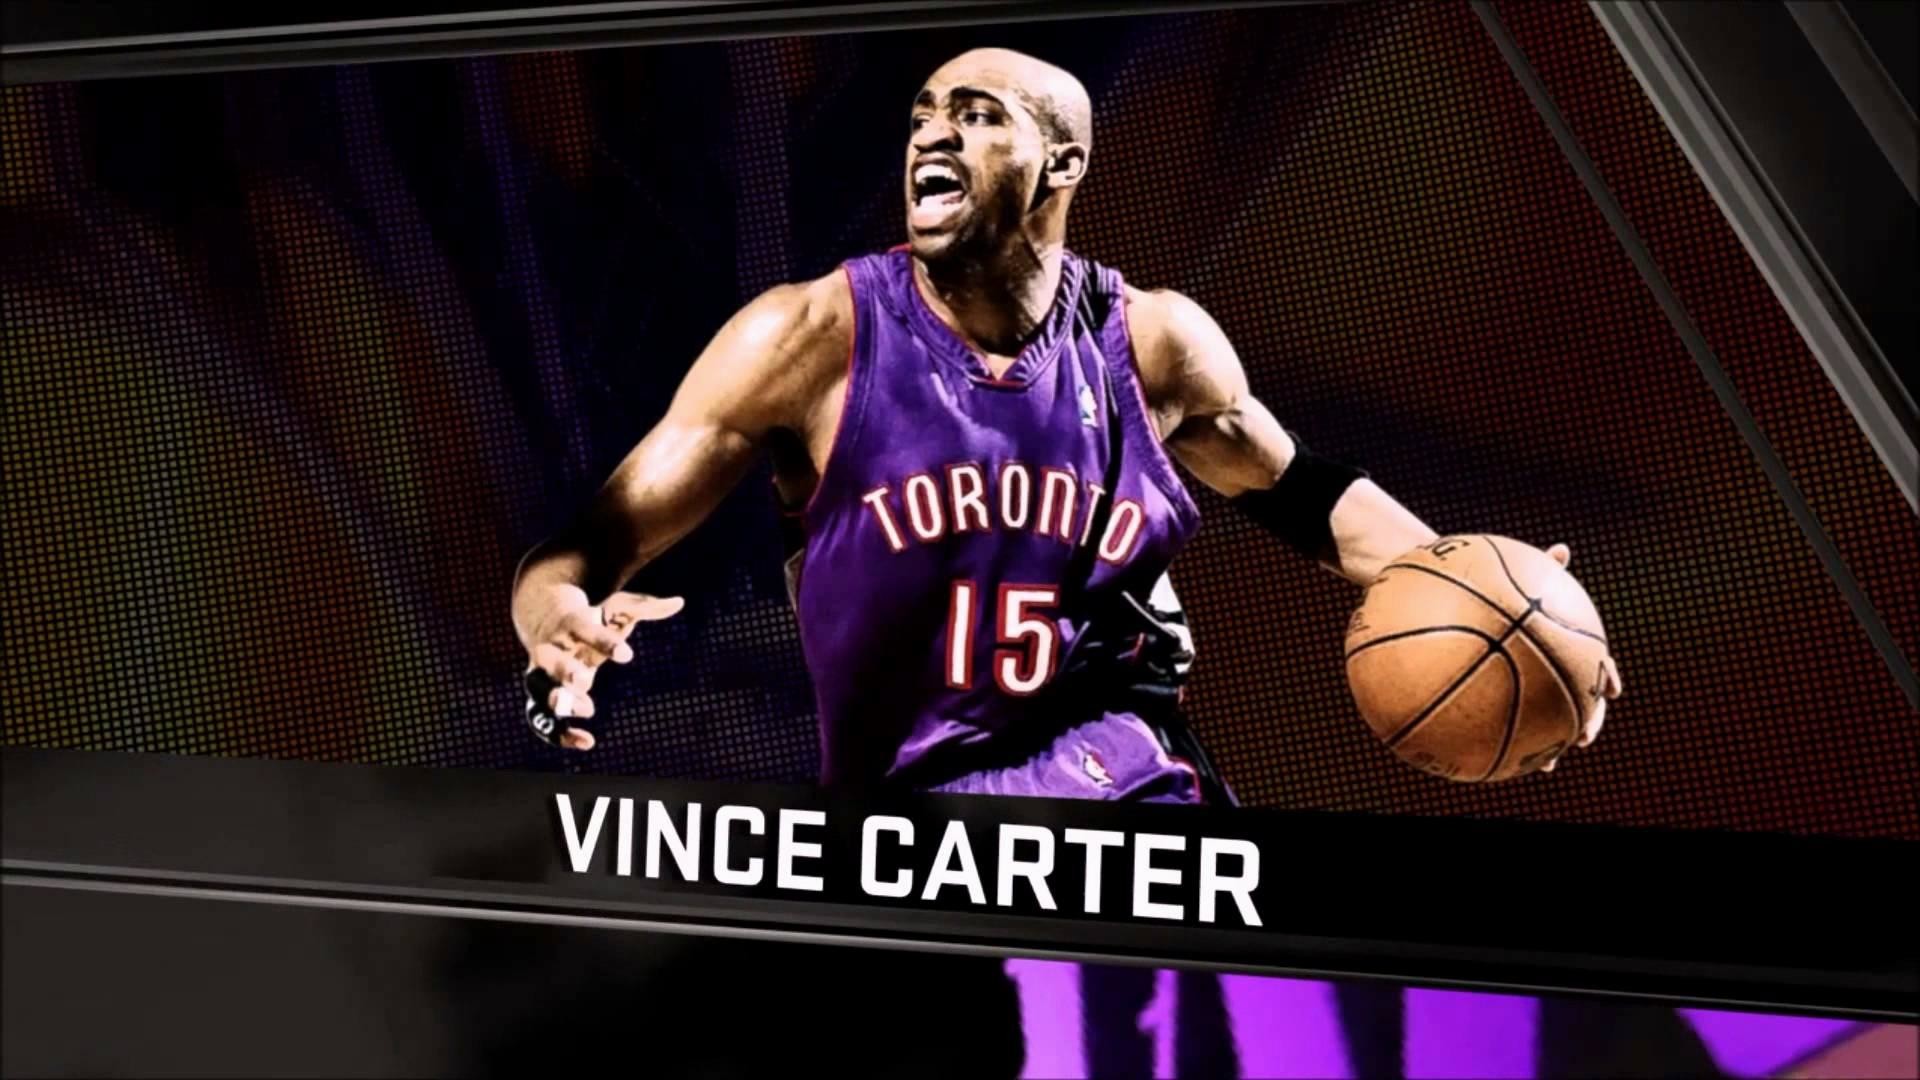 1920x1080 ... Vince Carter Wallpaper by redzero03 on DeviantArt NBA.com - Photo of  the Year Wallpapers ...